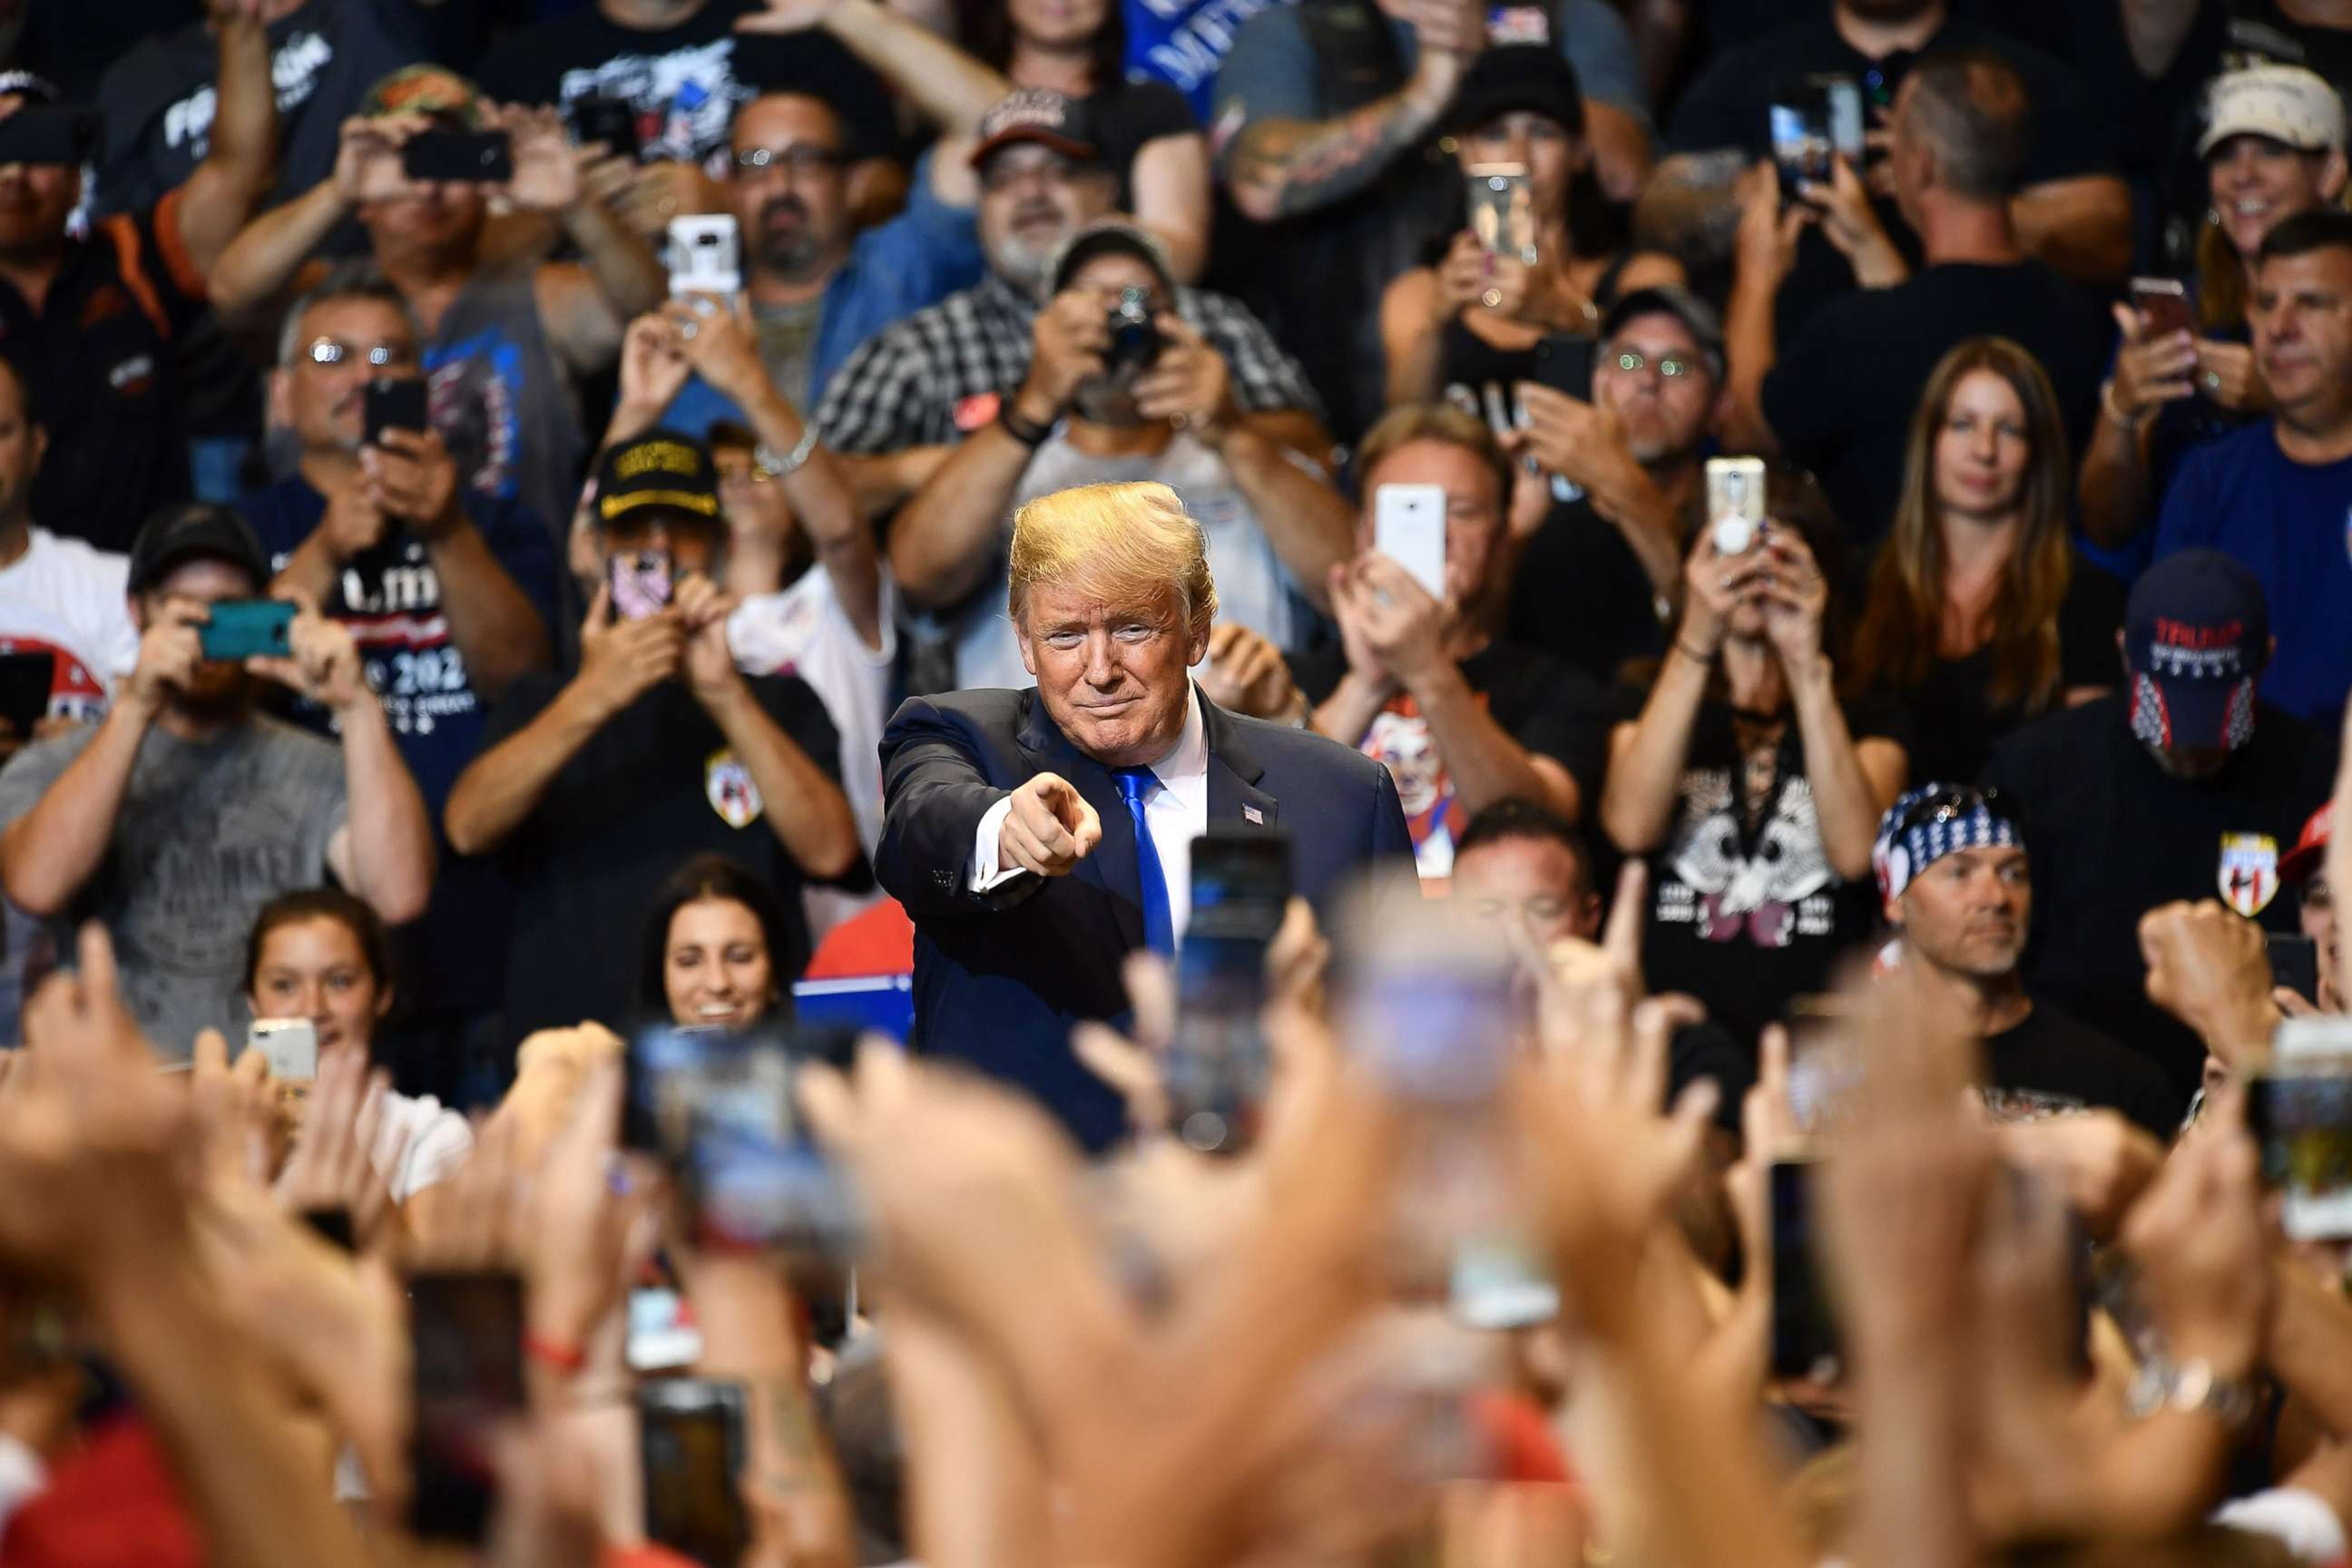 PHOTO: President Donald Trump speaks at a political rally at Mohegan Sun Arena in Wilkes-Barre, Pa., Aug. 2, 2018.